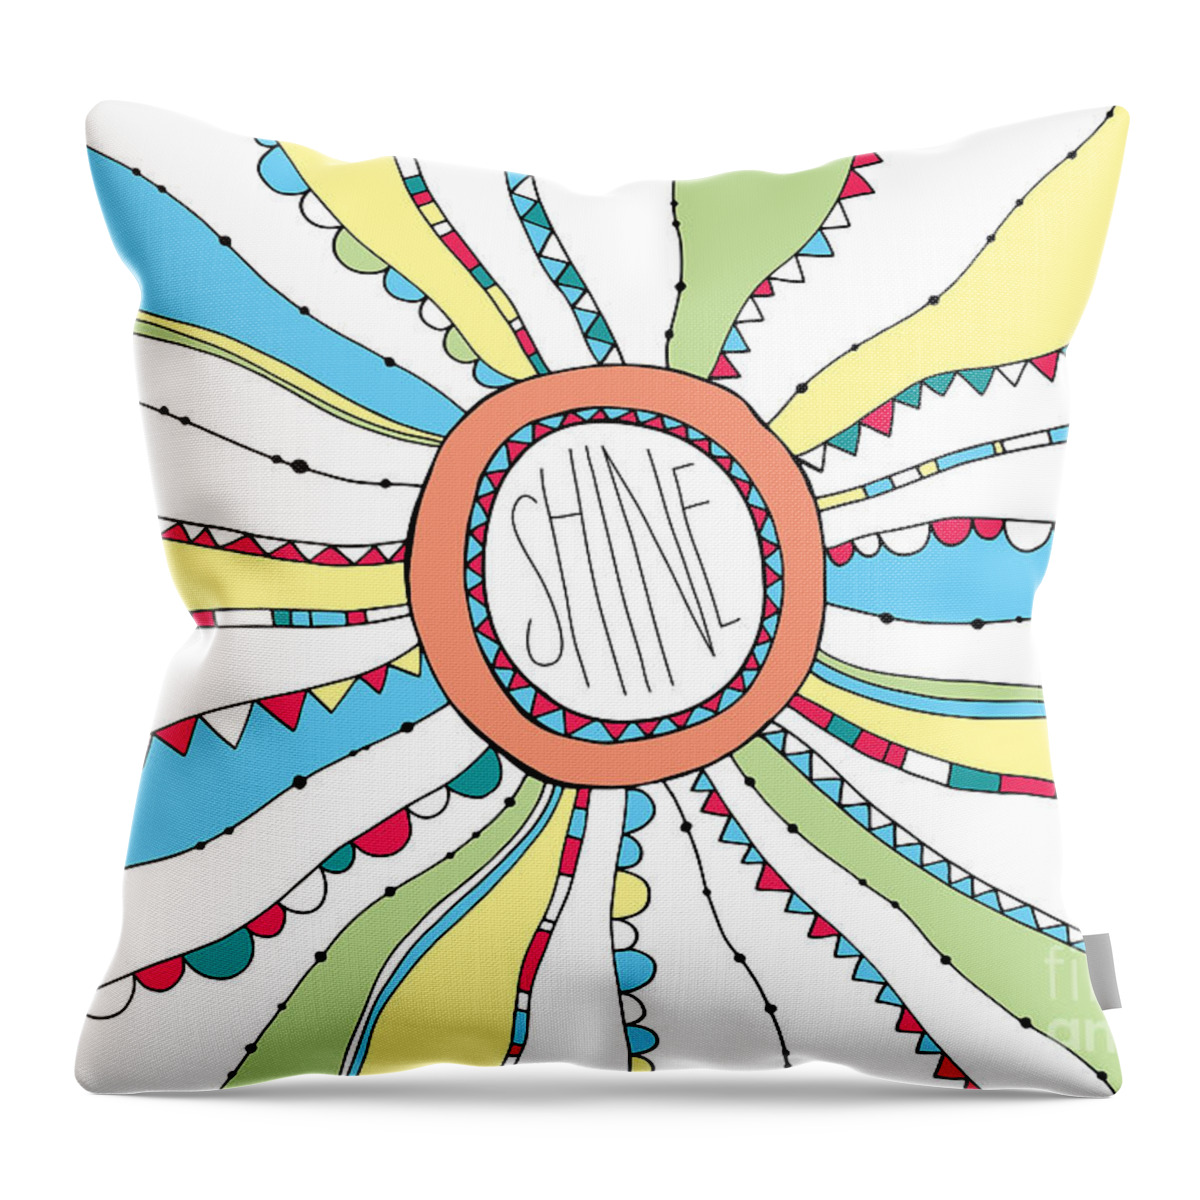 Positivity Throw Pillow featuring the digital art Shine by MGL Meiklejohn Graphics Licensing